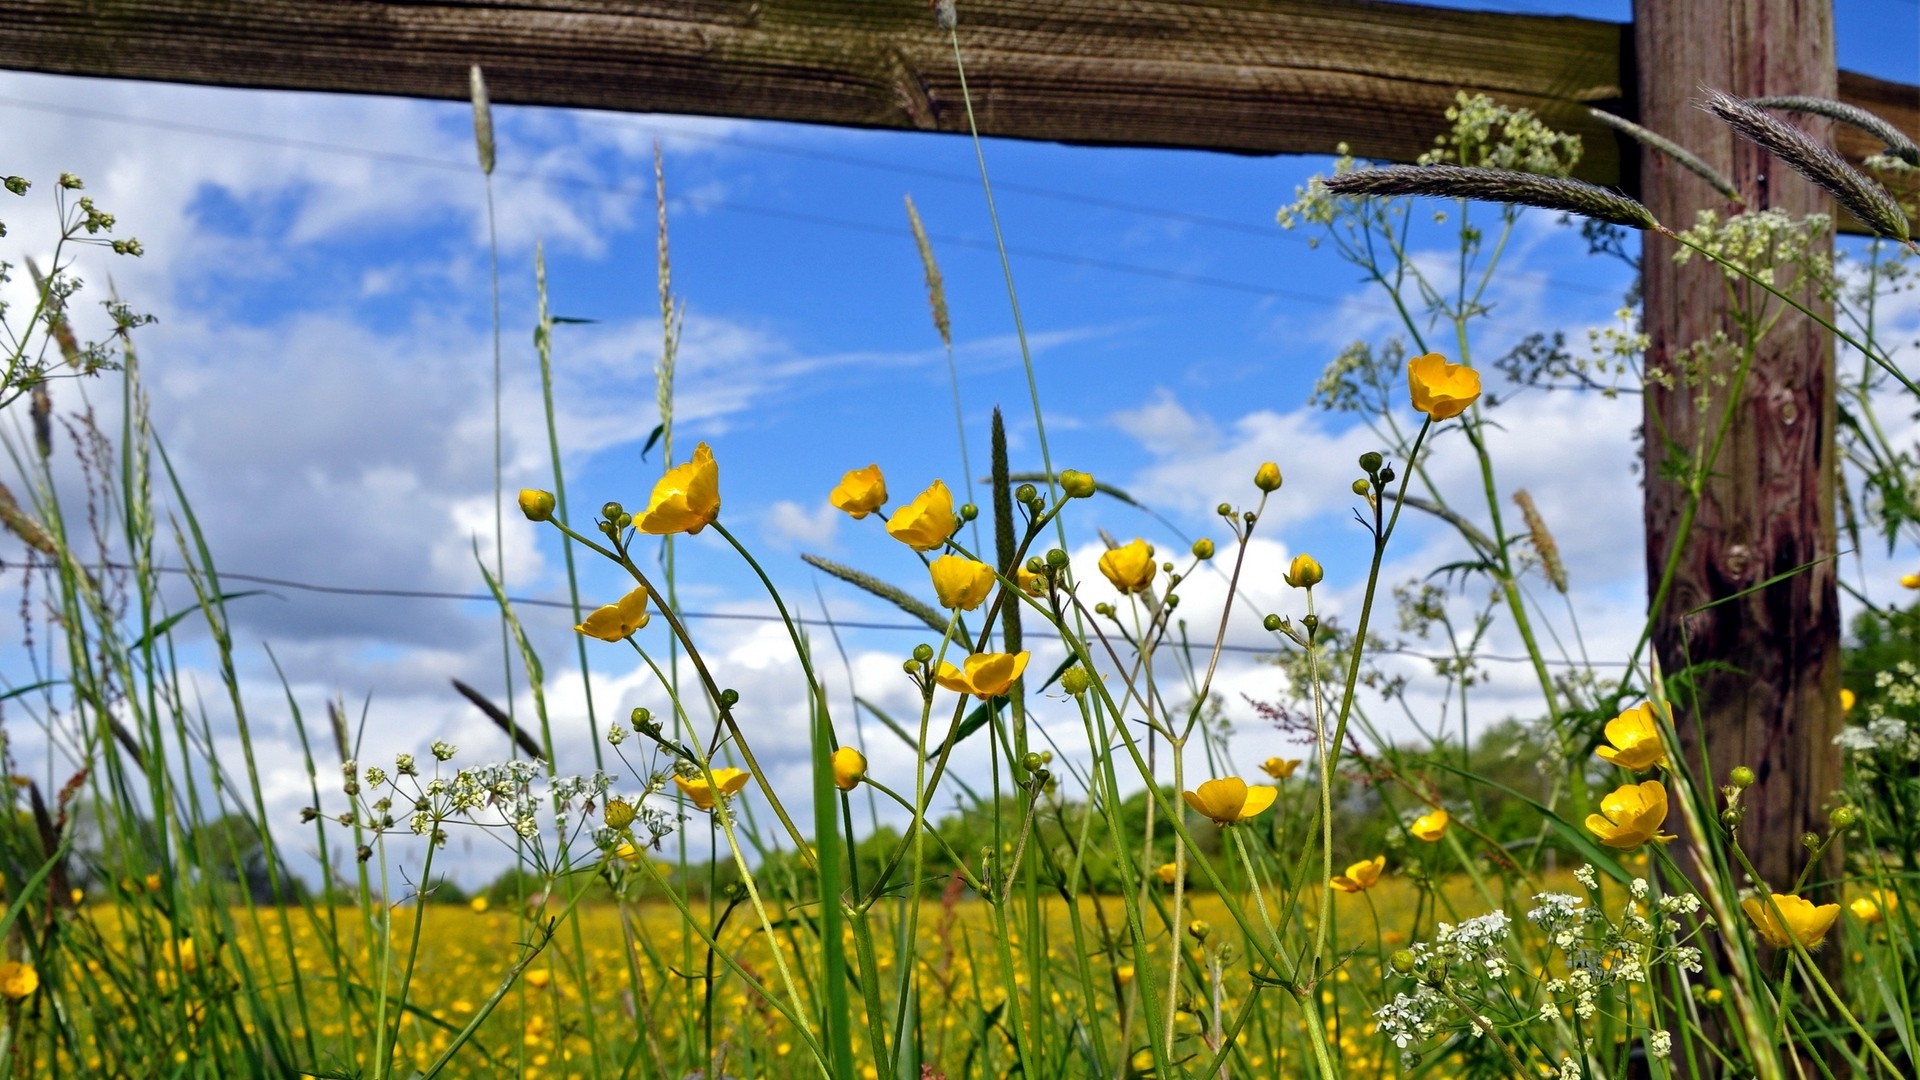 1920x1080 wallpapers: fence, flowers, field, yellow, sunny, boards (image)